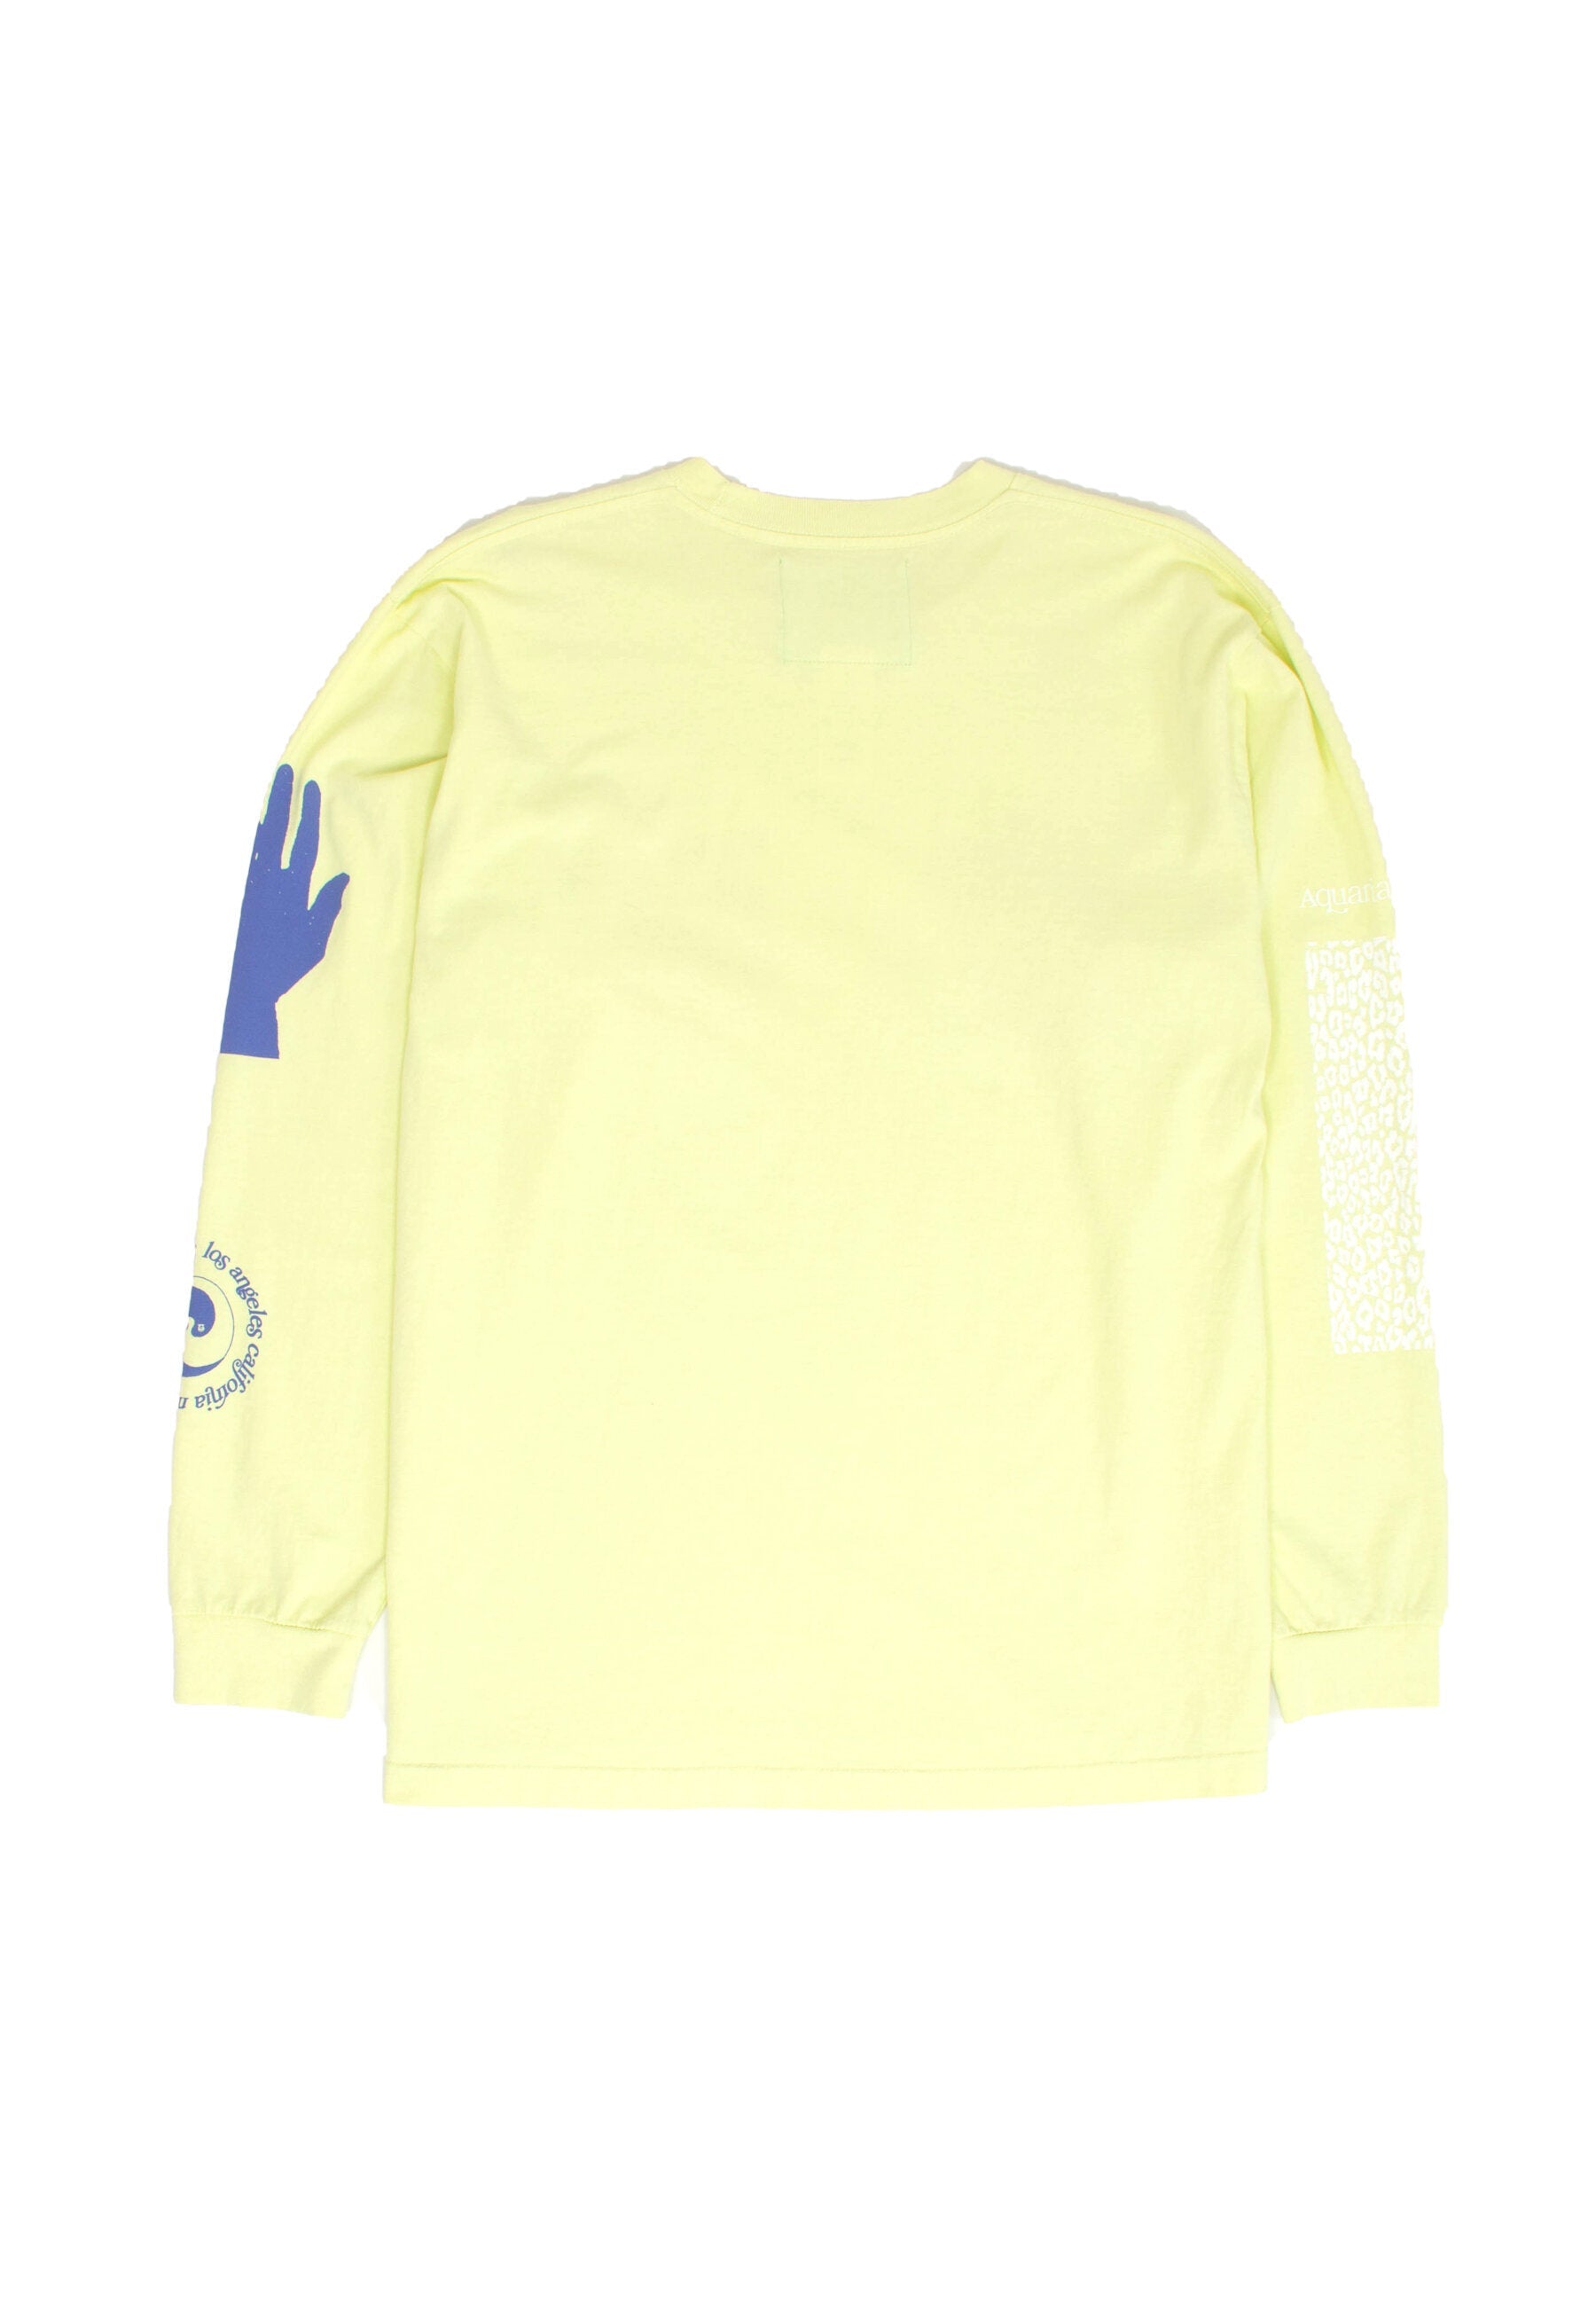 Aquarian Collage L/S Tee - Nuclear-Mister Green-Mister Green